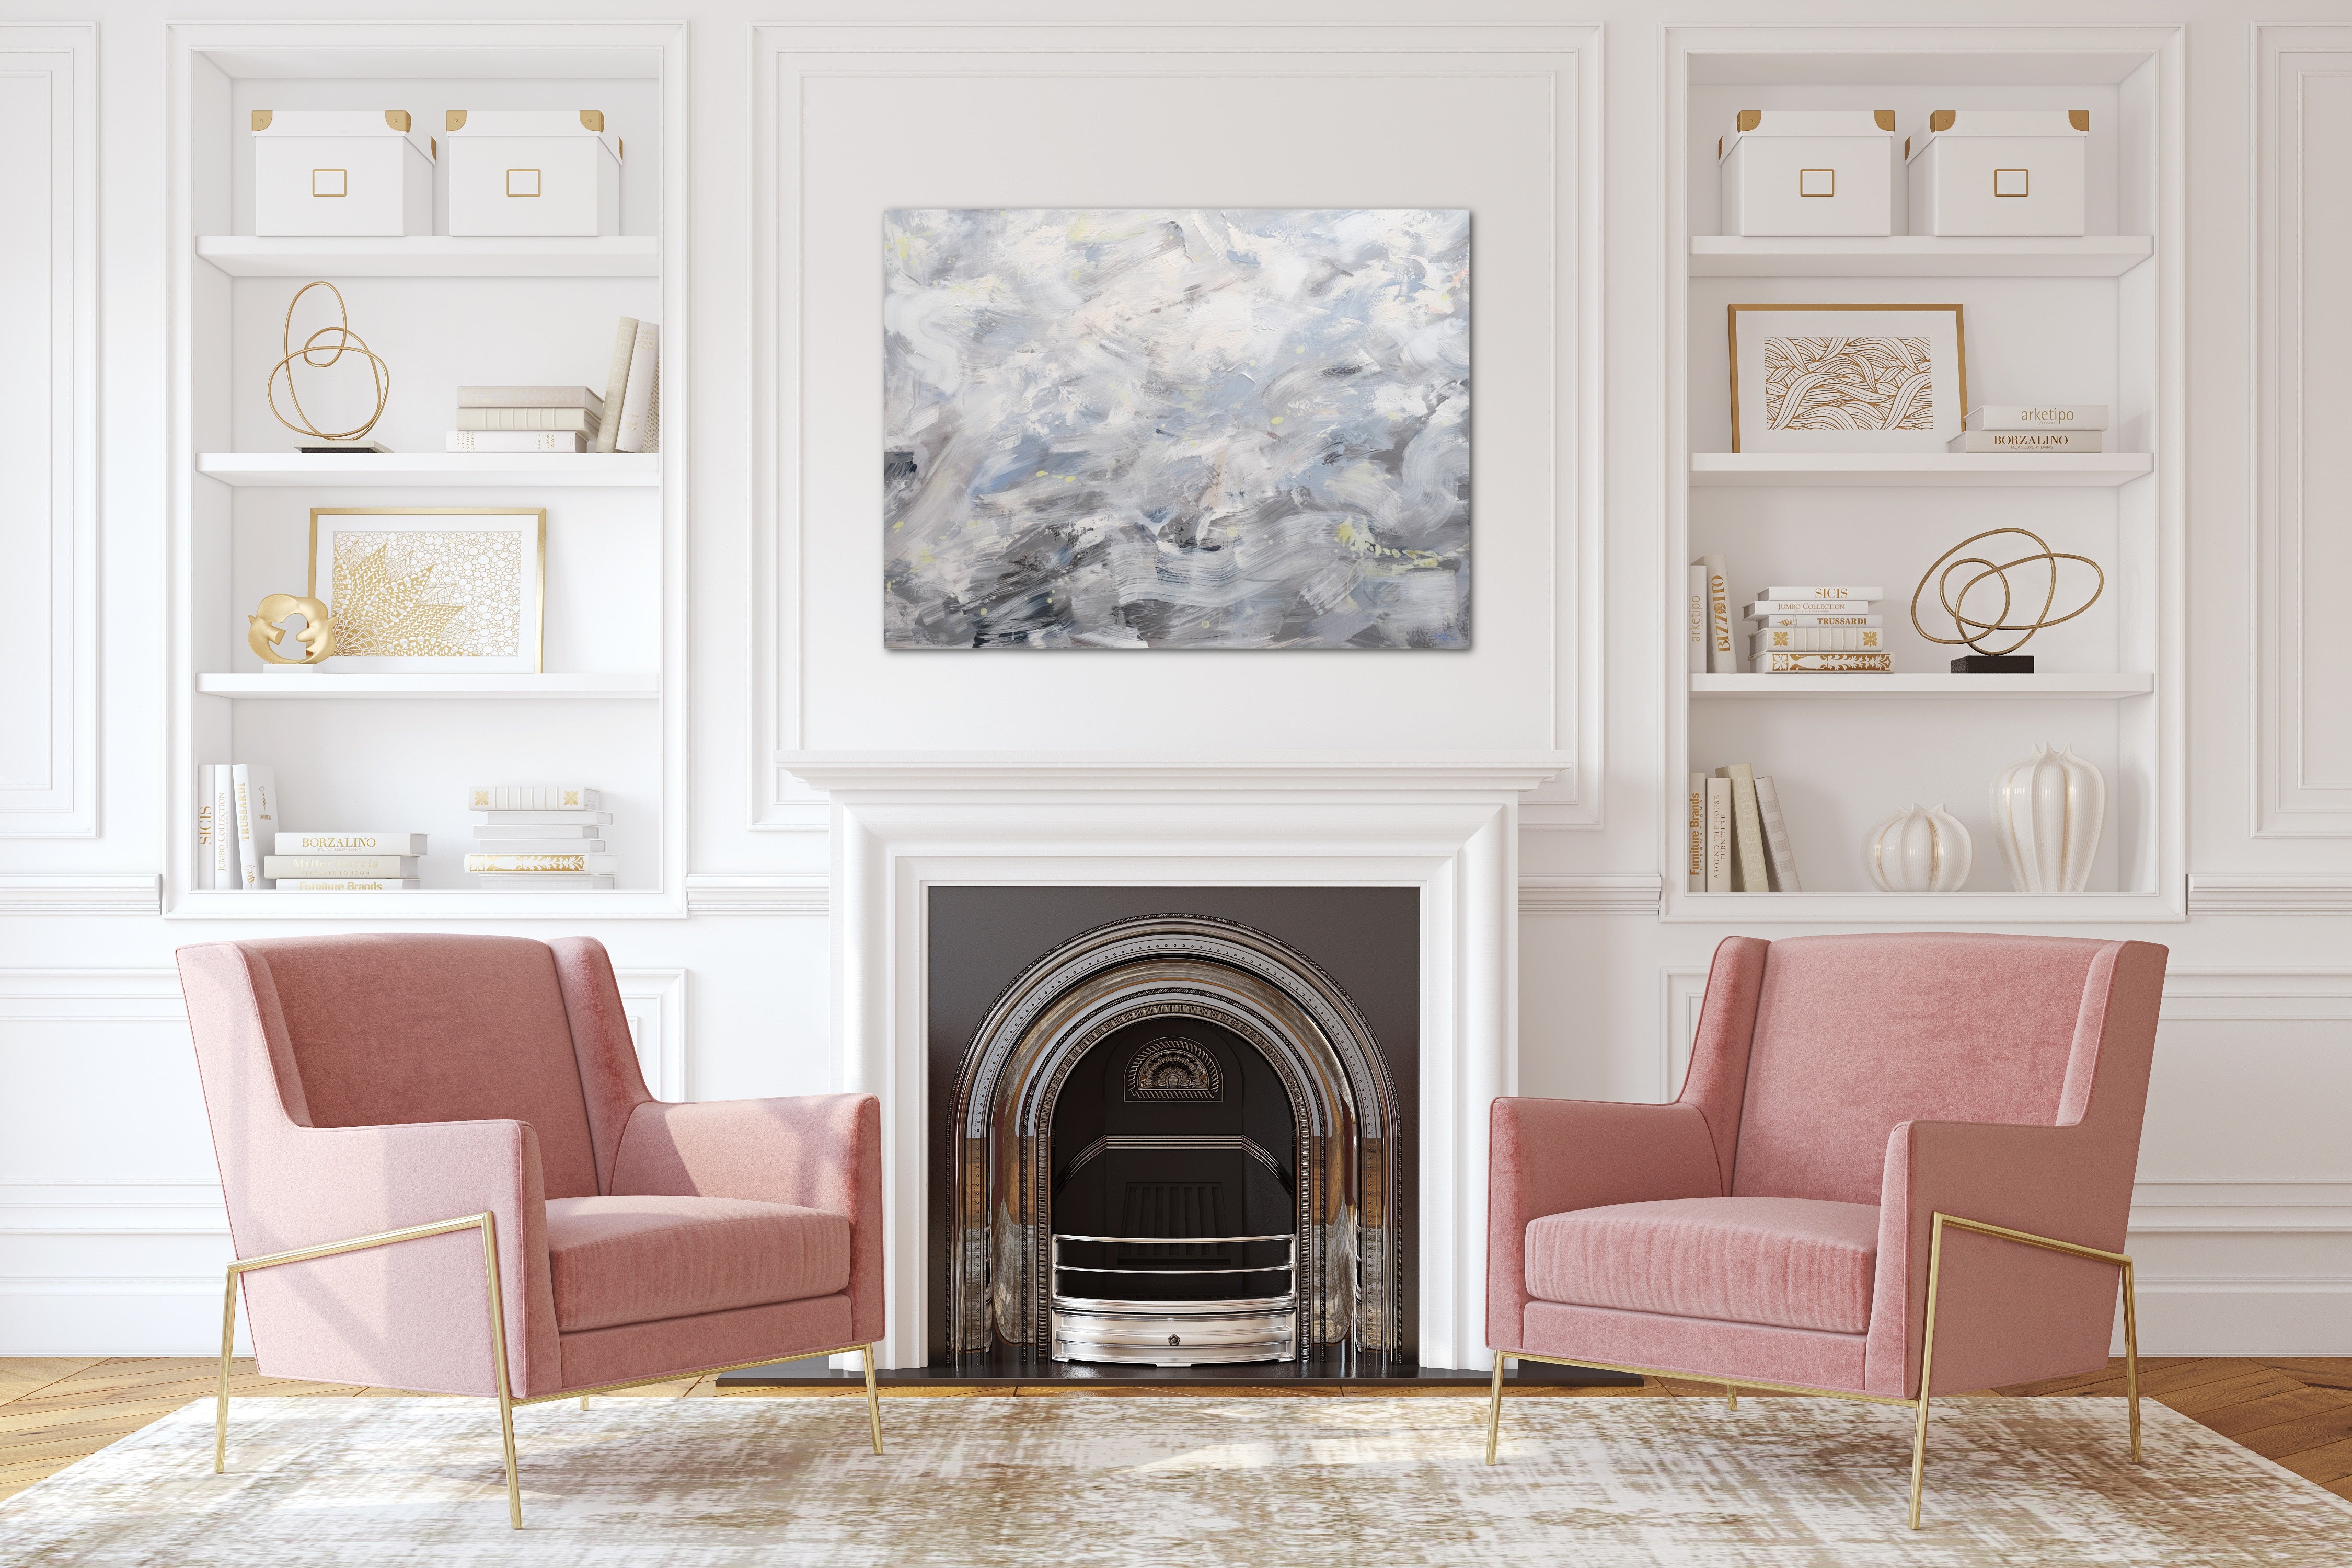 A grey painting hangs above a fireplace in a traditional modern living room.  Two pink chairs add a fun pop of colour to the space. 